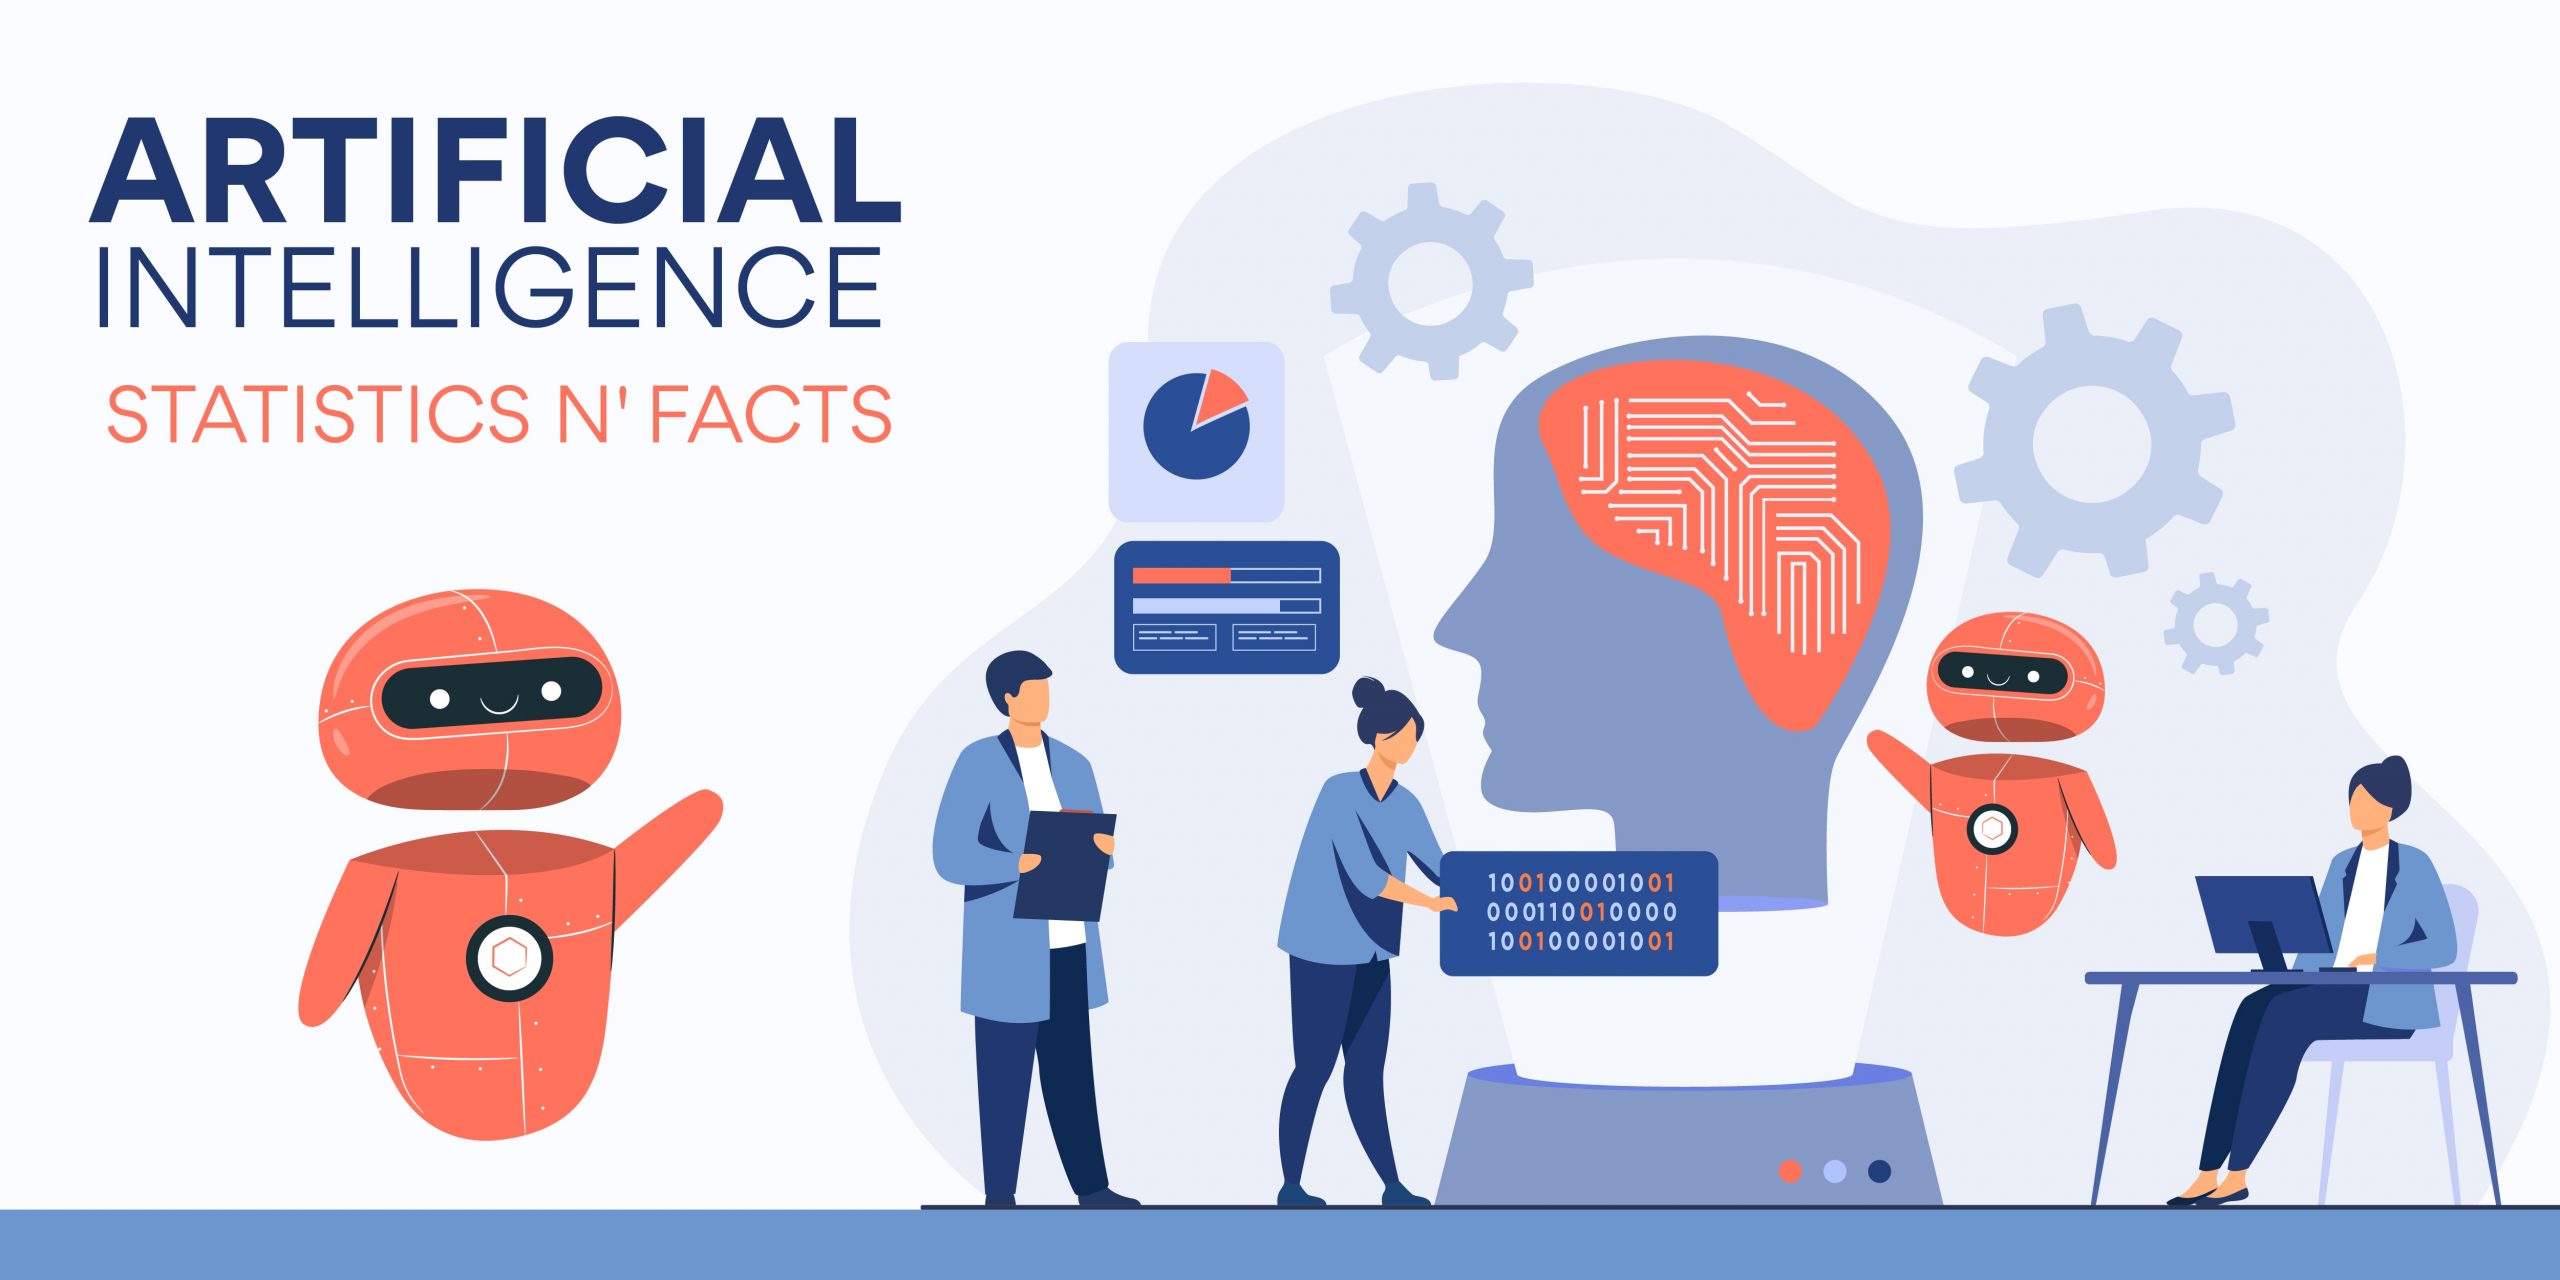 Artificial Intelligence Statistics – By Dependent Industries Processes, Perceptions, Adoption Rate, AI Capabilities, Obstructions to Adopt AI, Departments